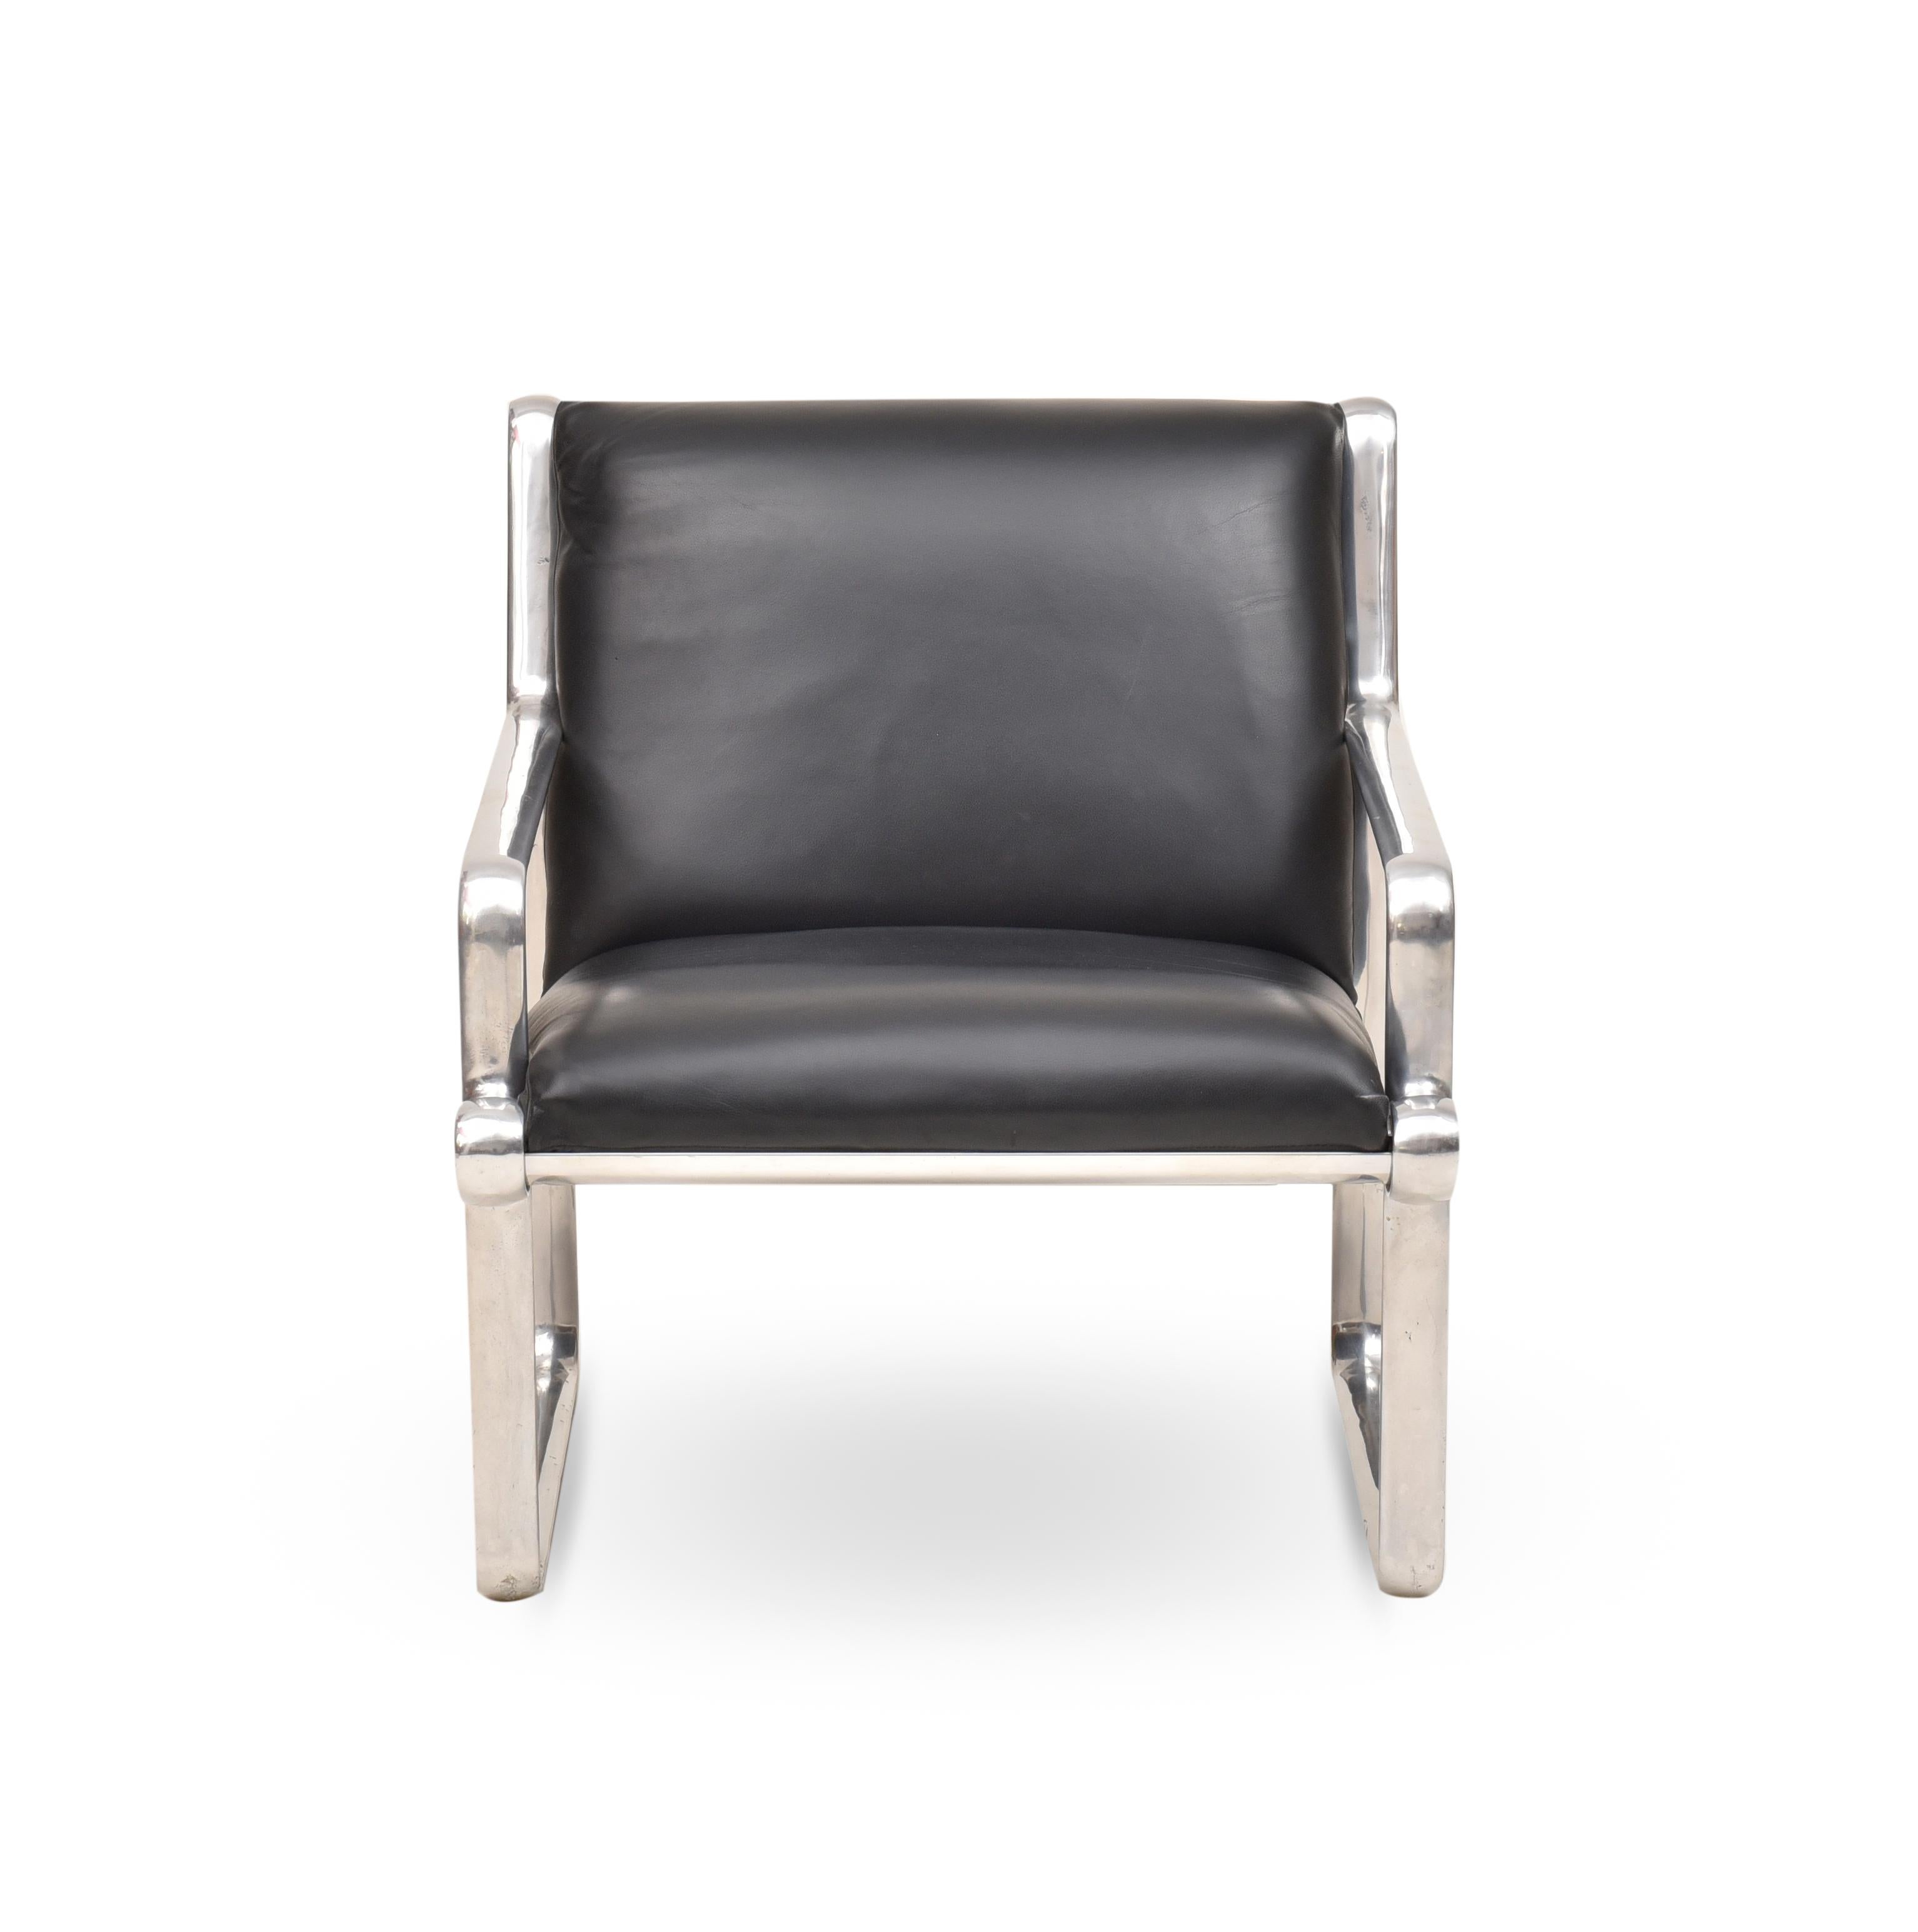 20th Century Hanna Armchair by Forma, Florence Knoll, 1975s For Sale